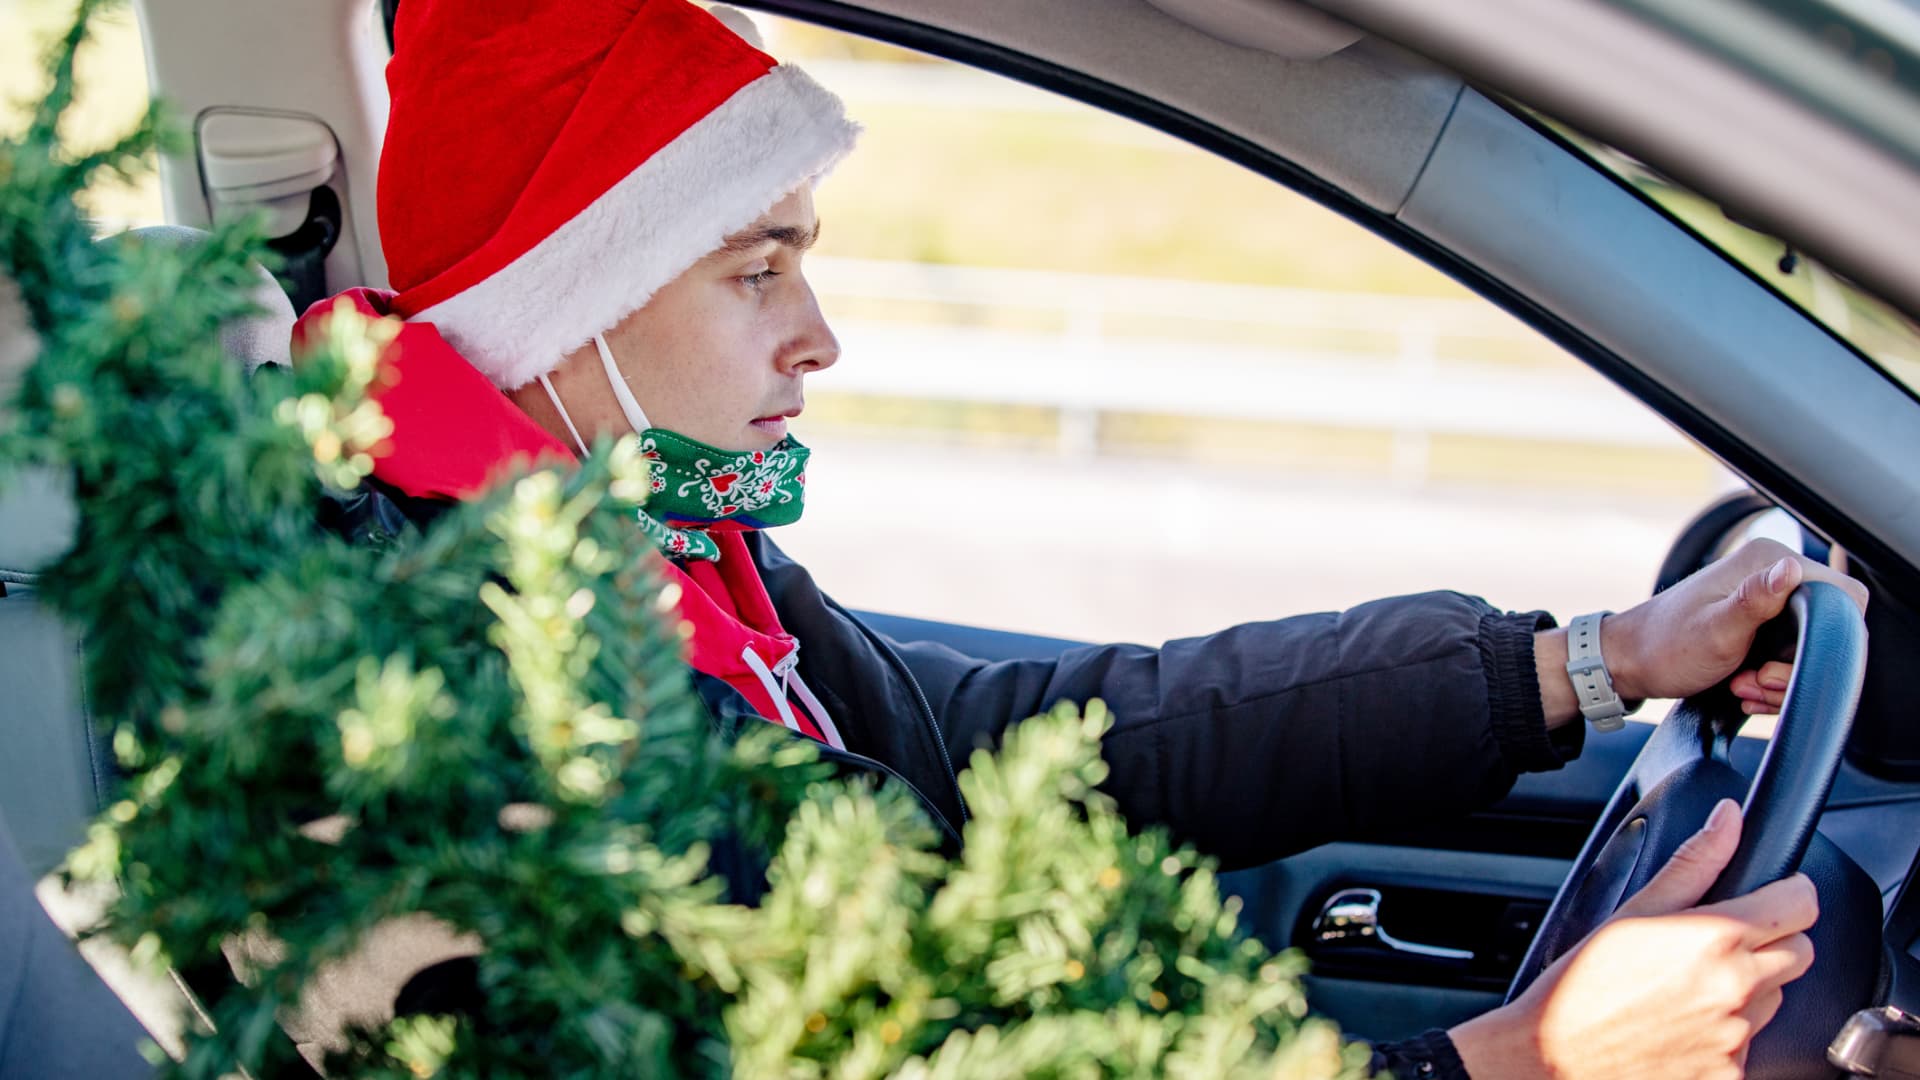 While flying is considered fairly safe, driving is recommended this holiday season.